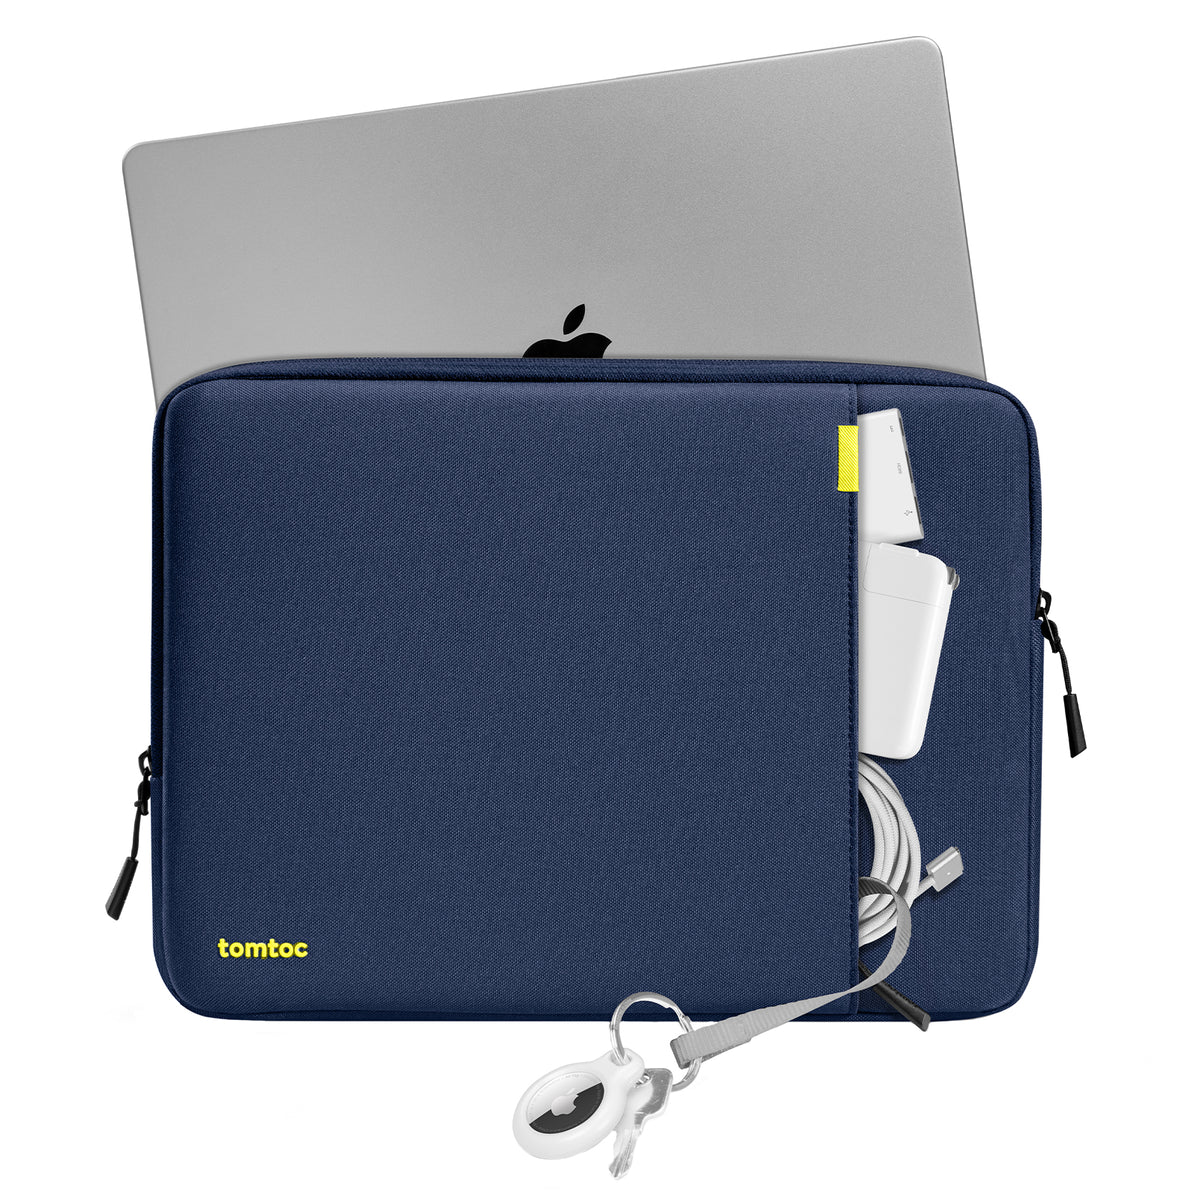 secondary_Defender-A13 Laptop Sleeve for 16-inch MacBook Pro